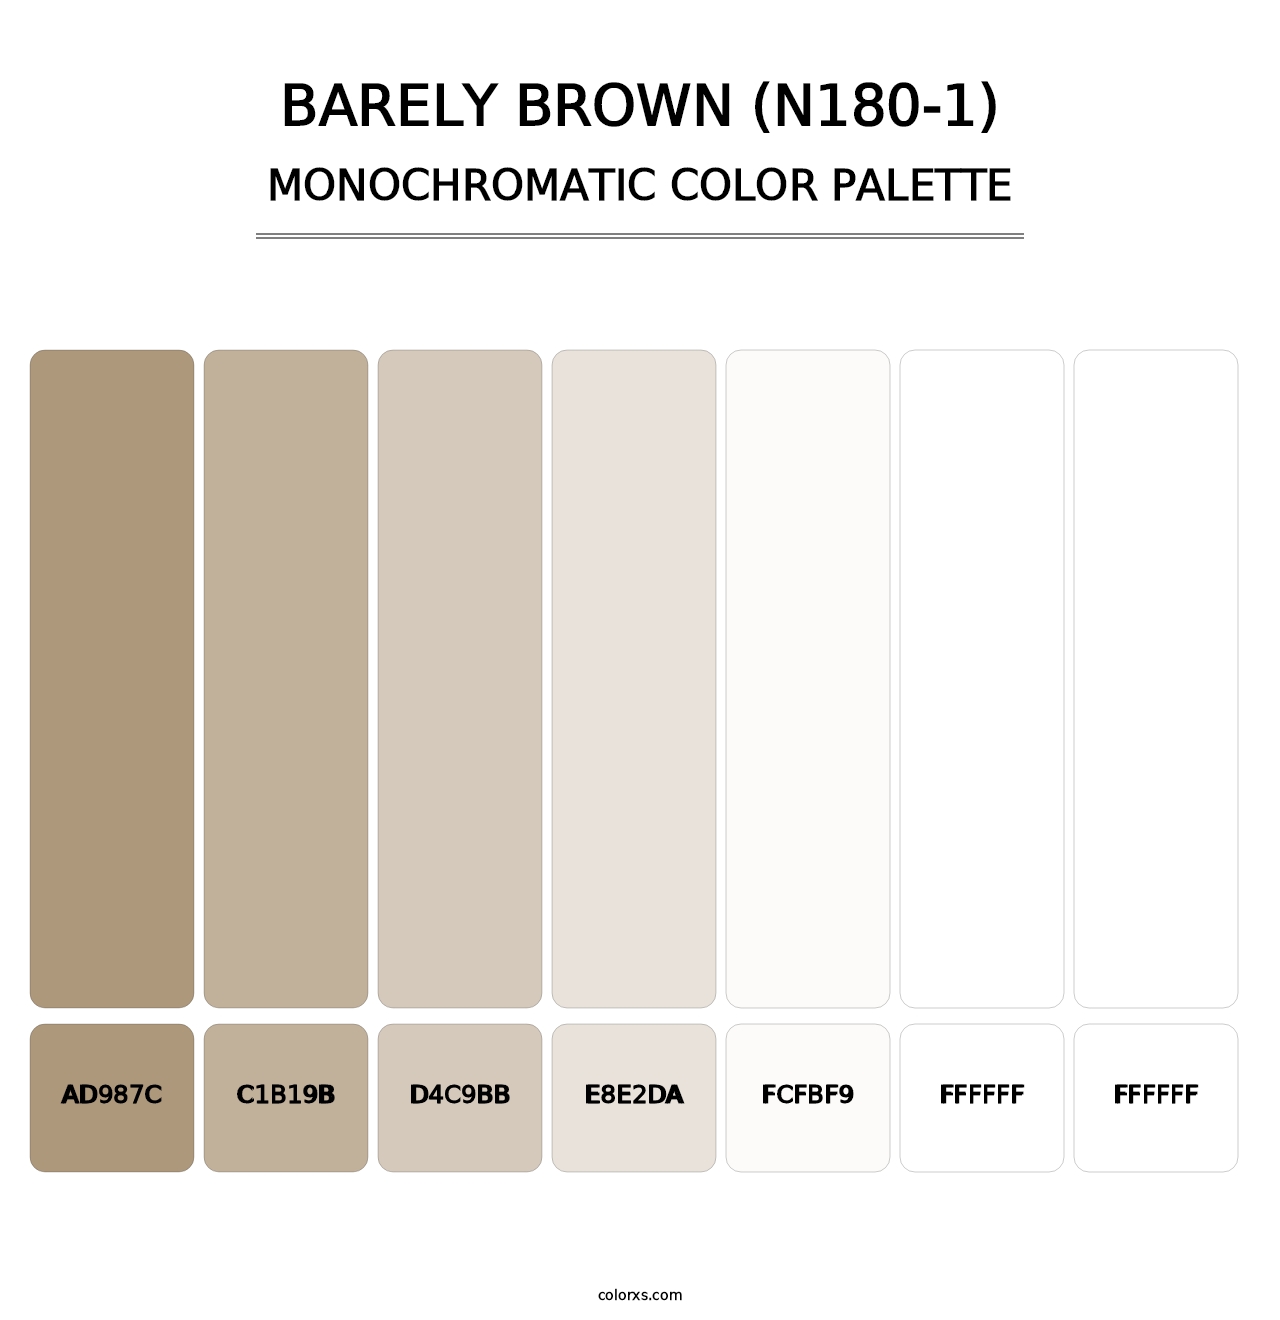 Barely Brown (N180-1) - Monochromatic Color Palette